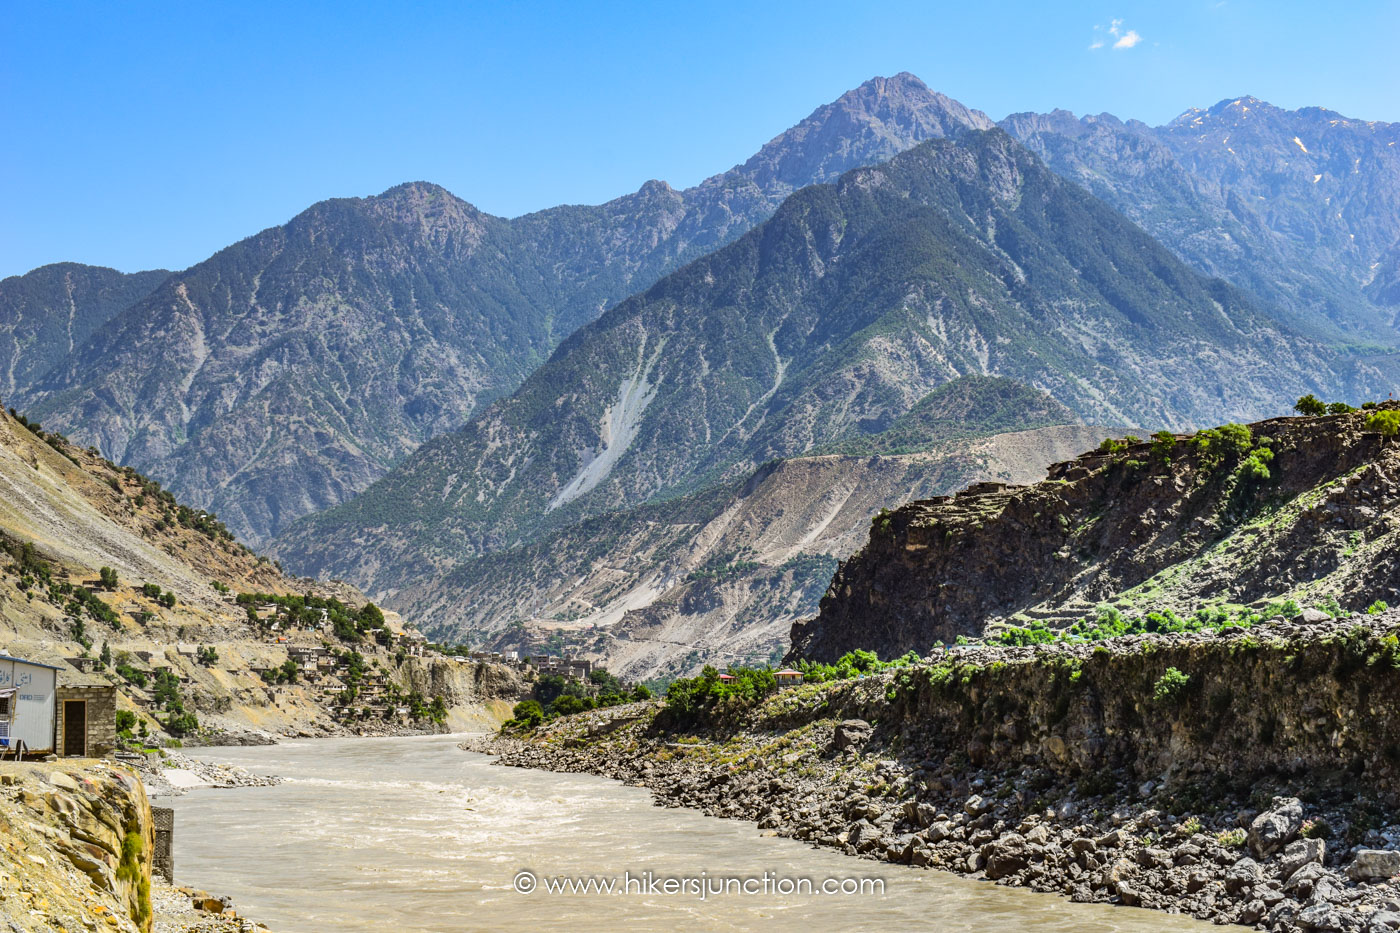 Travelling alongside the Indus River on the KKH